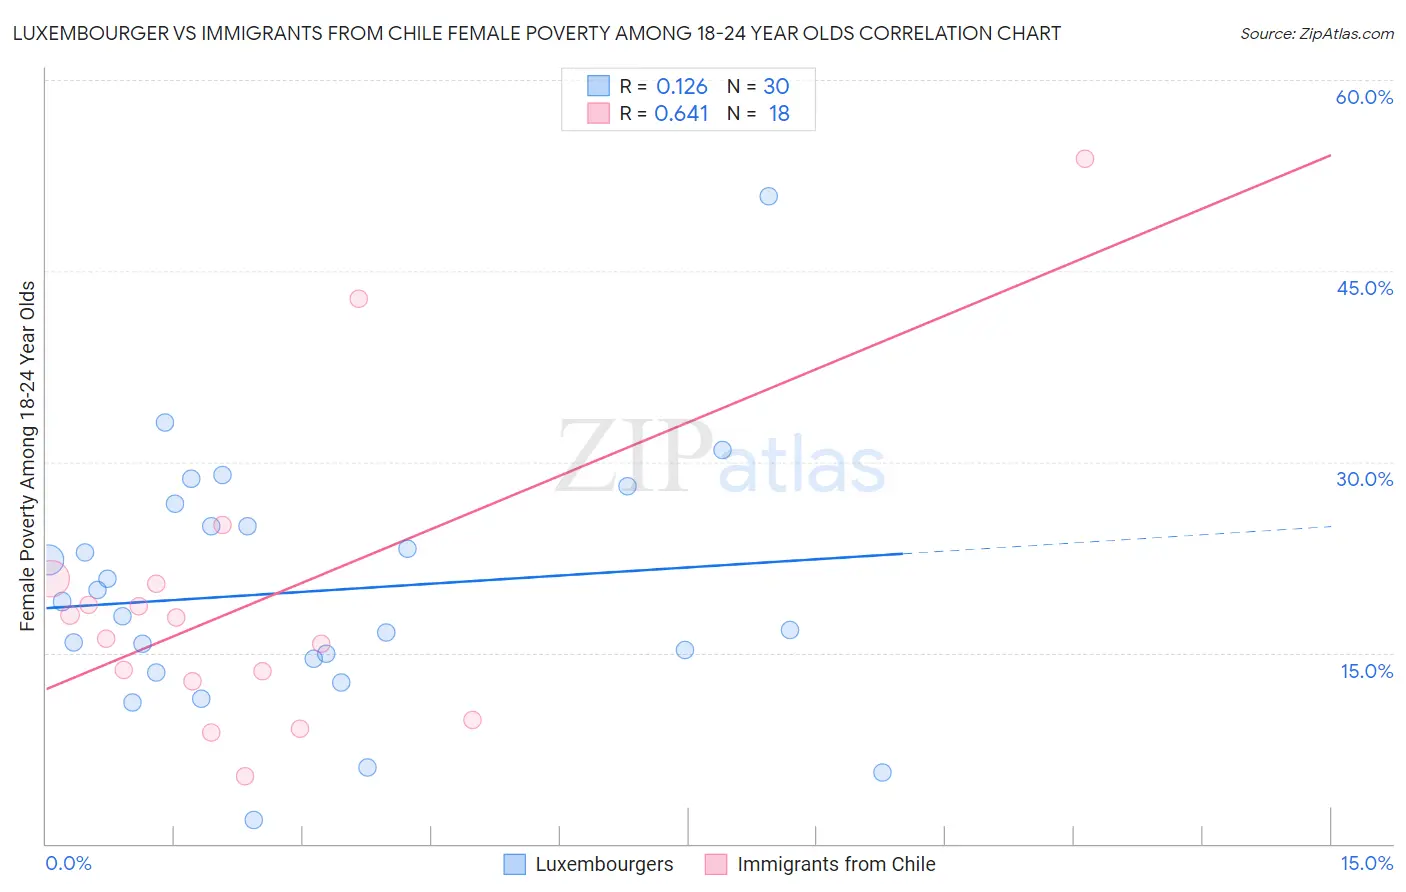 Luxembourger vs Immigrants from Chile Female Poverty Among 18-24 Year Olds